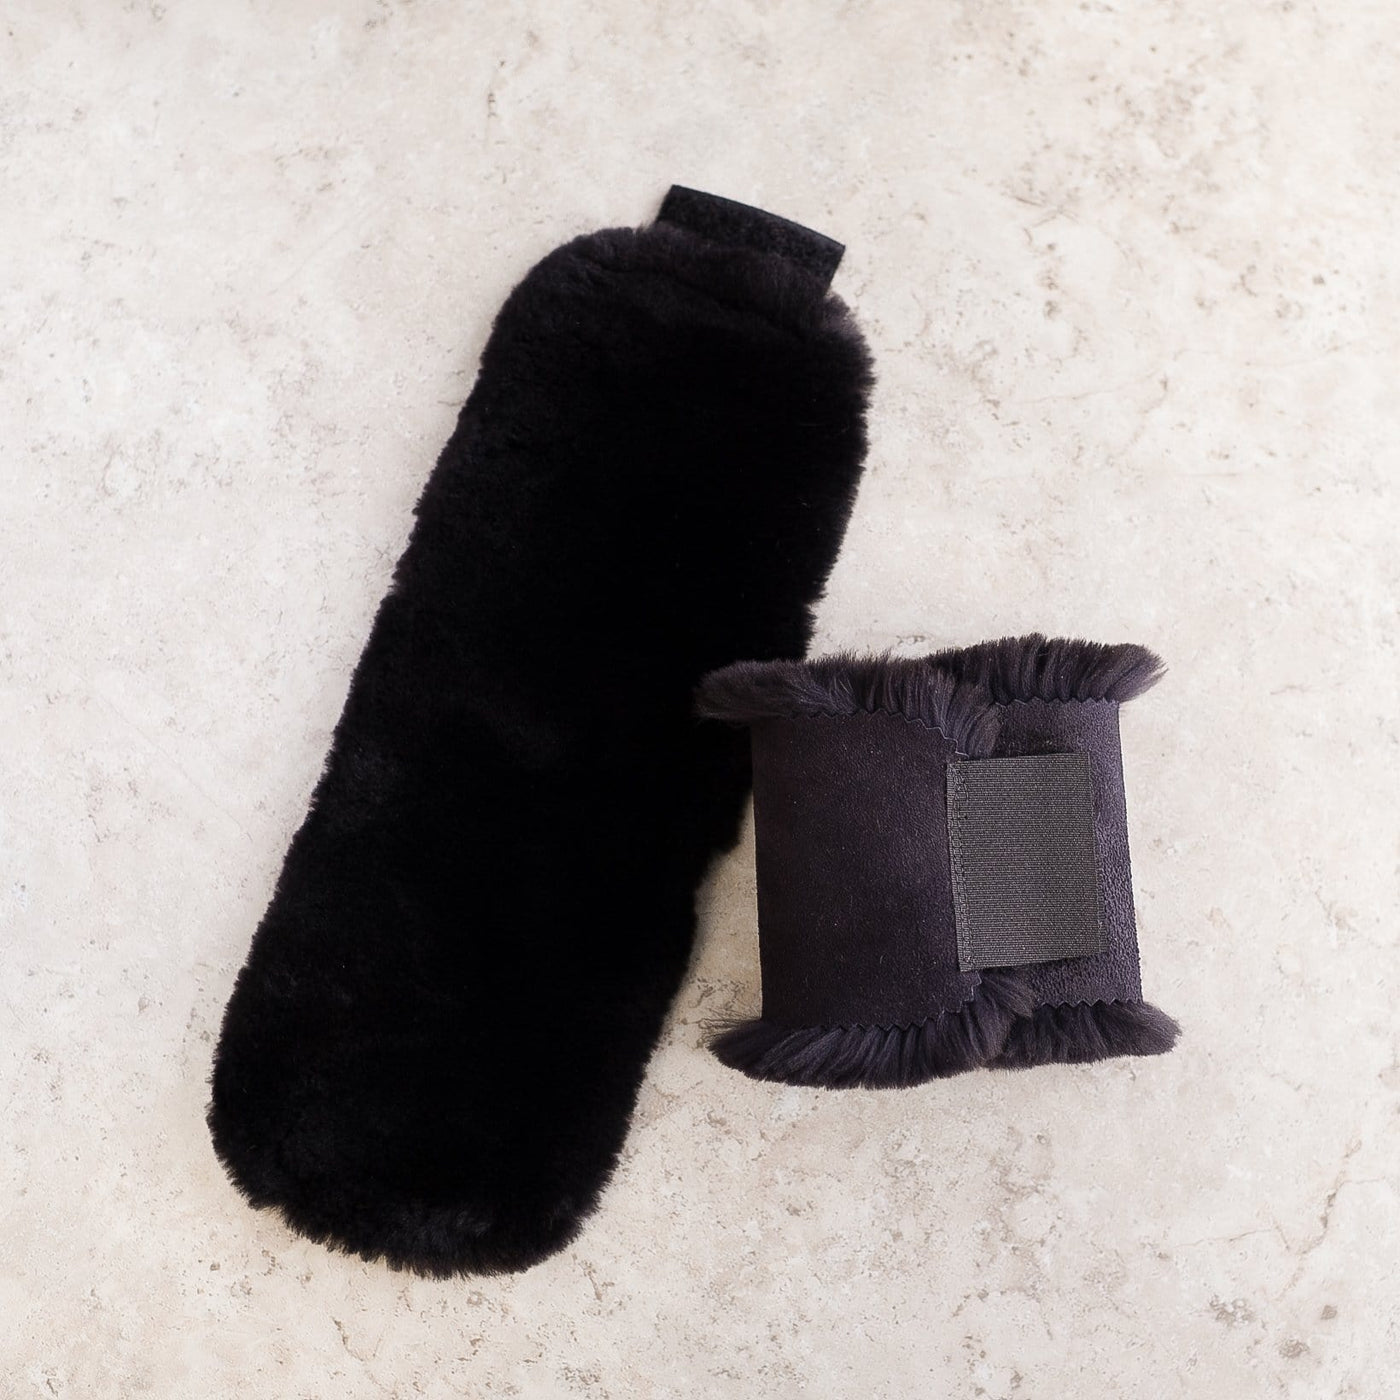 Natural and Reusable Canadian Fur Ankle Warmers - Black